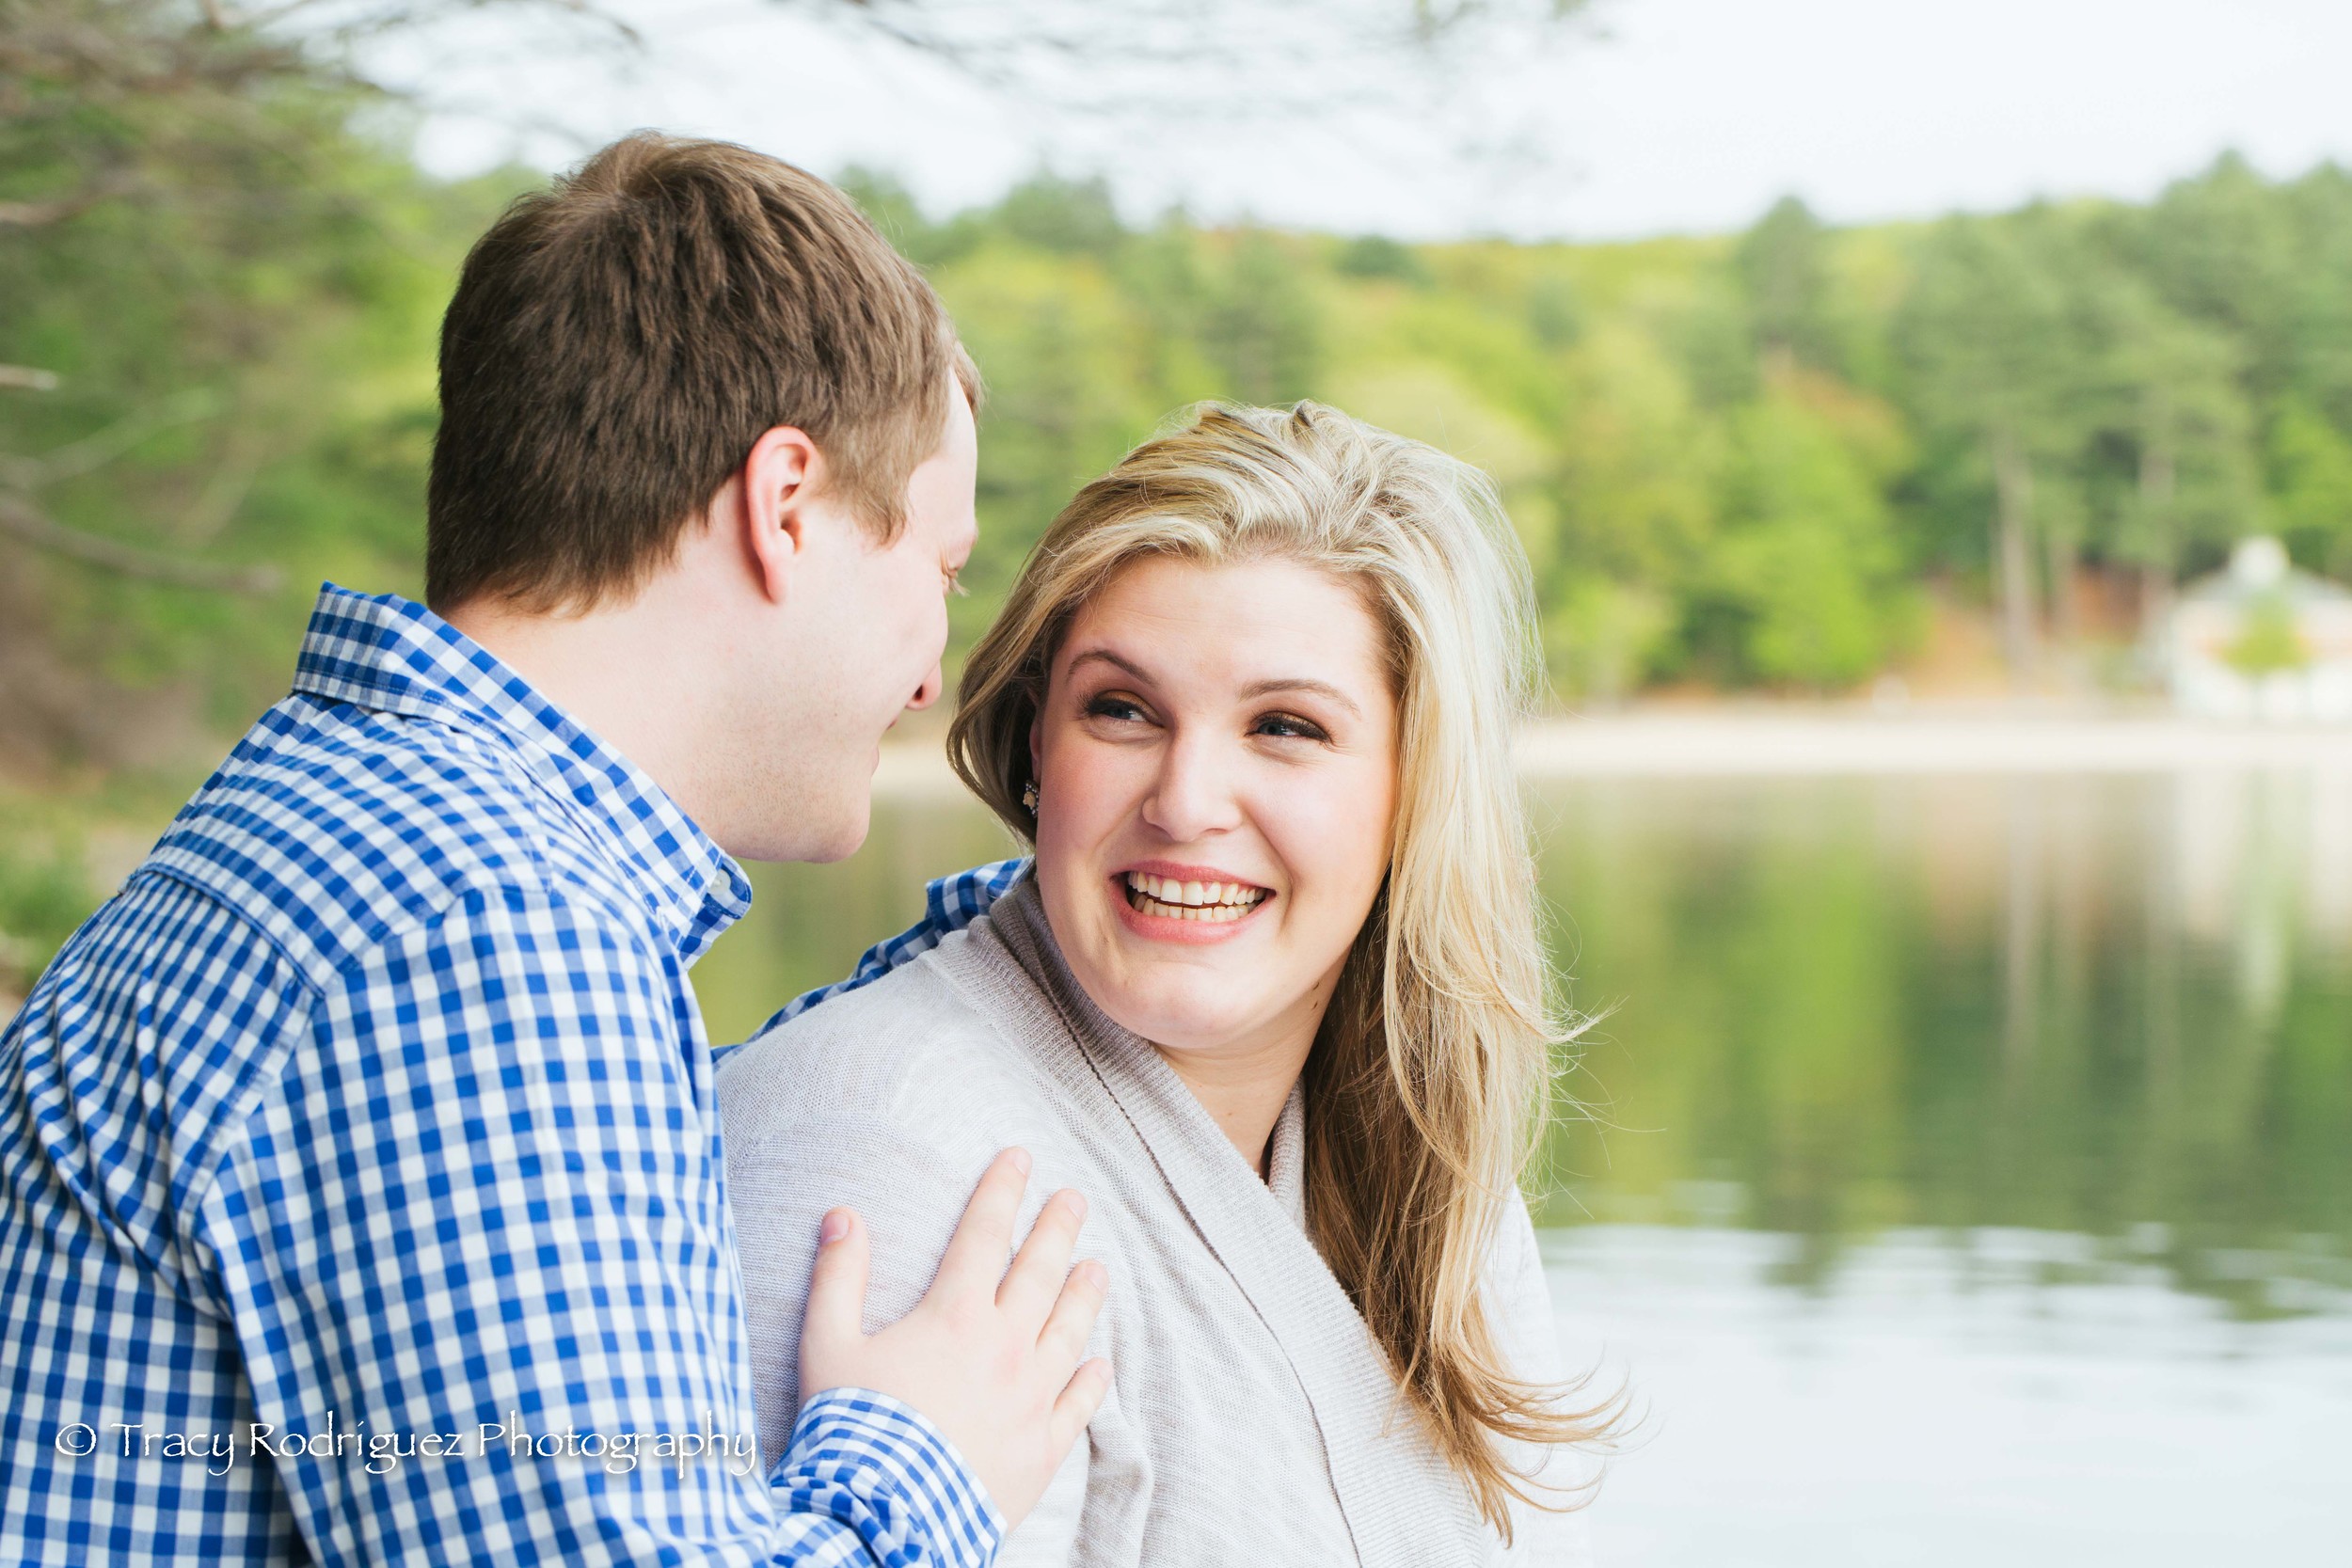 TracyRodriguezPhotography-Engagement-LowRes-25.jpg